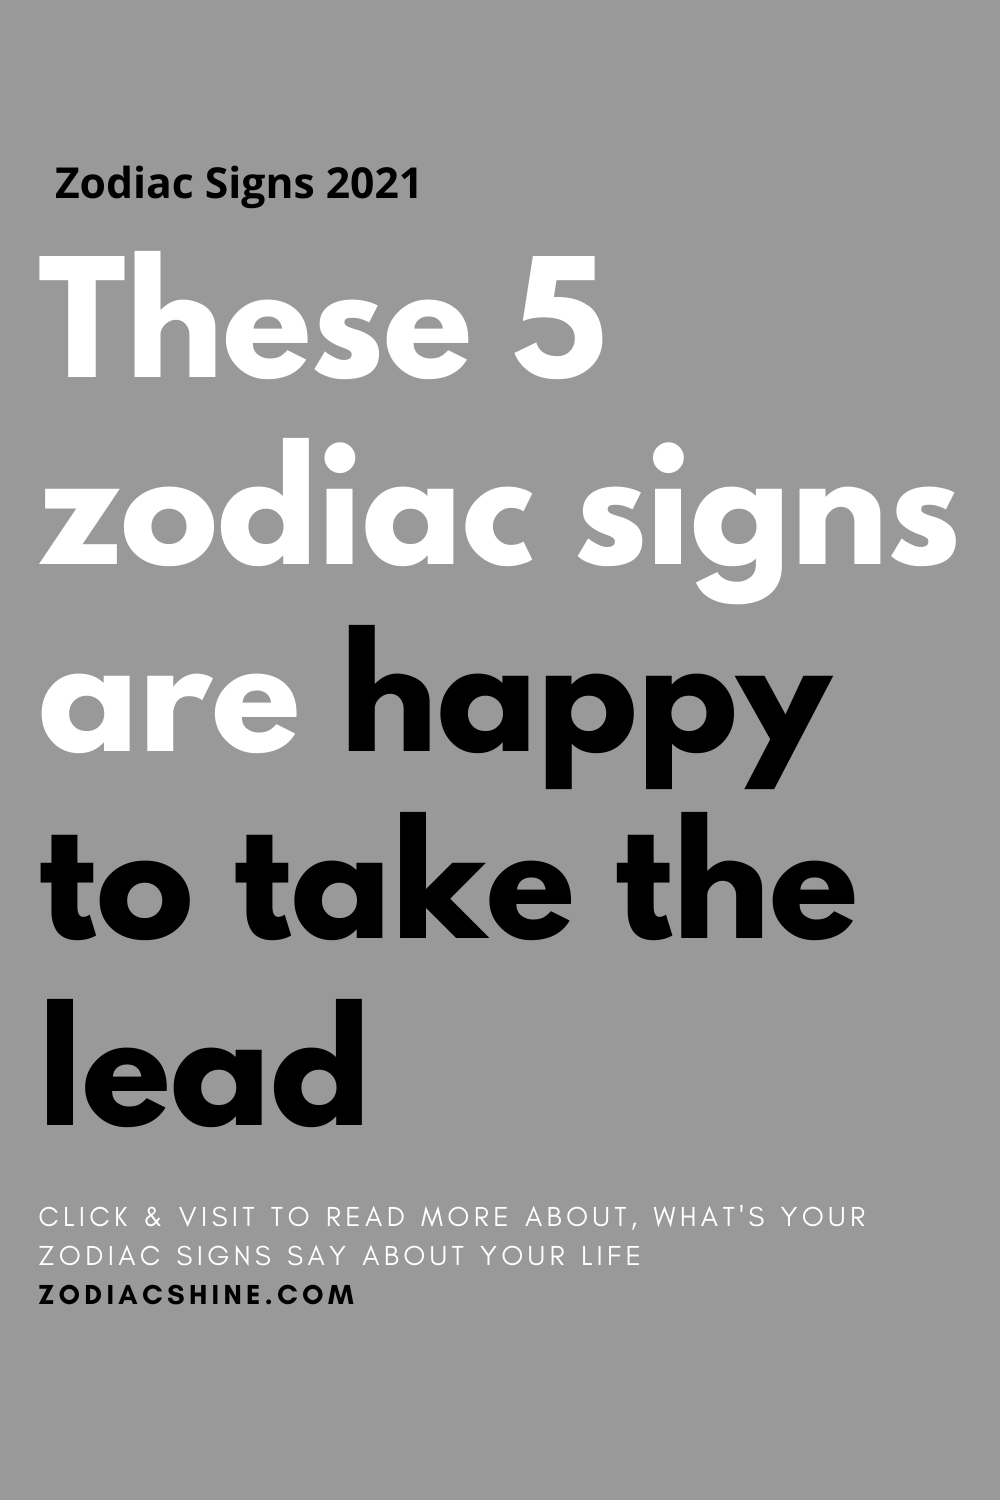 These 5 zodiac signs are happy to take the lead